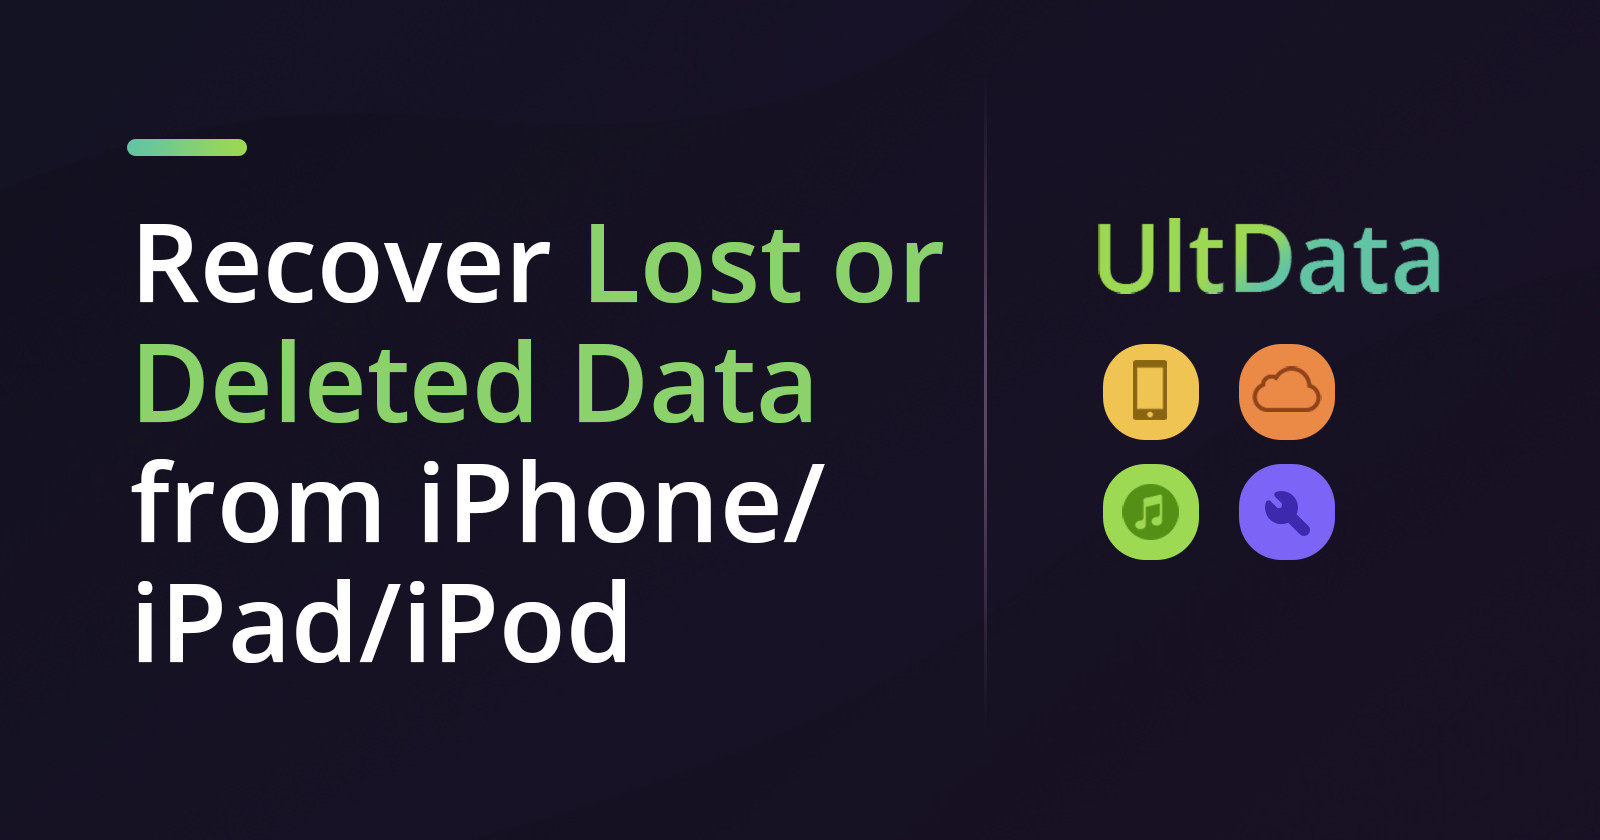 No matter whether your data is backed up in iCloud, in iTunes or not at all, the UltData app can get it back.